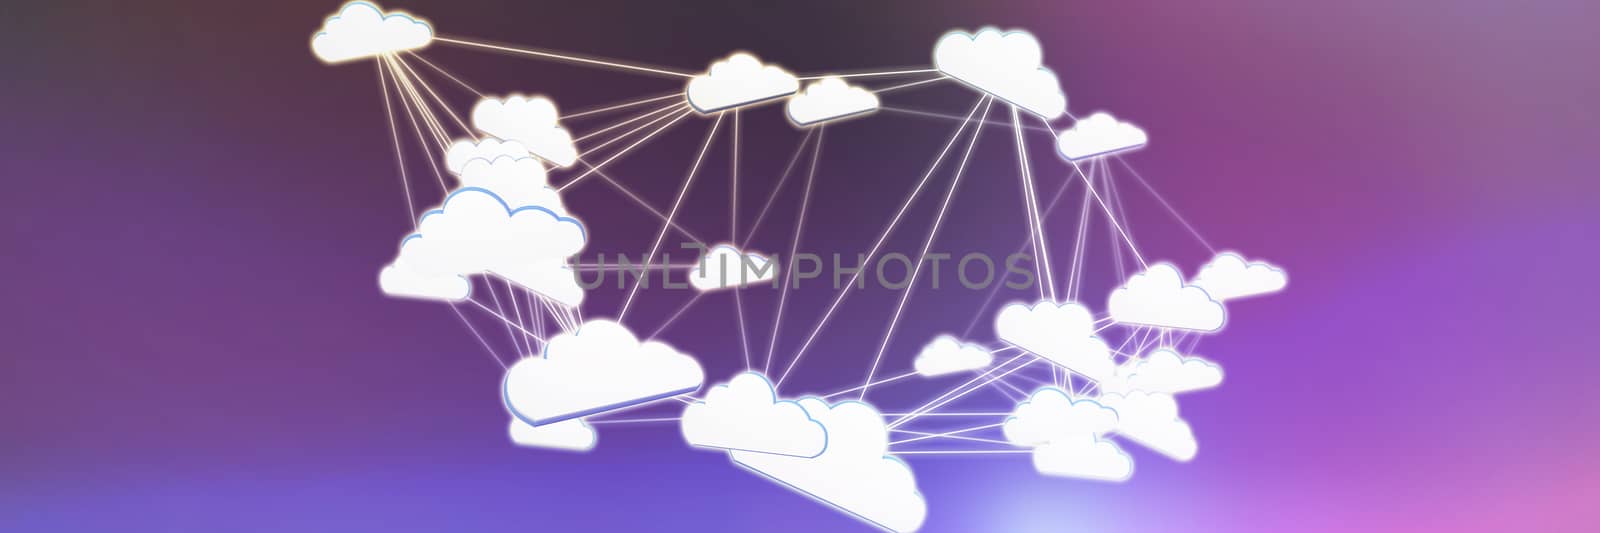 Abstract image of cloud computing symbol against pink and purple background